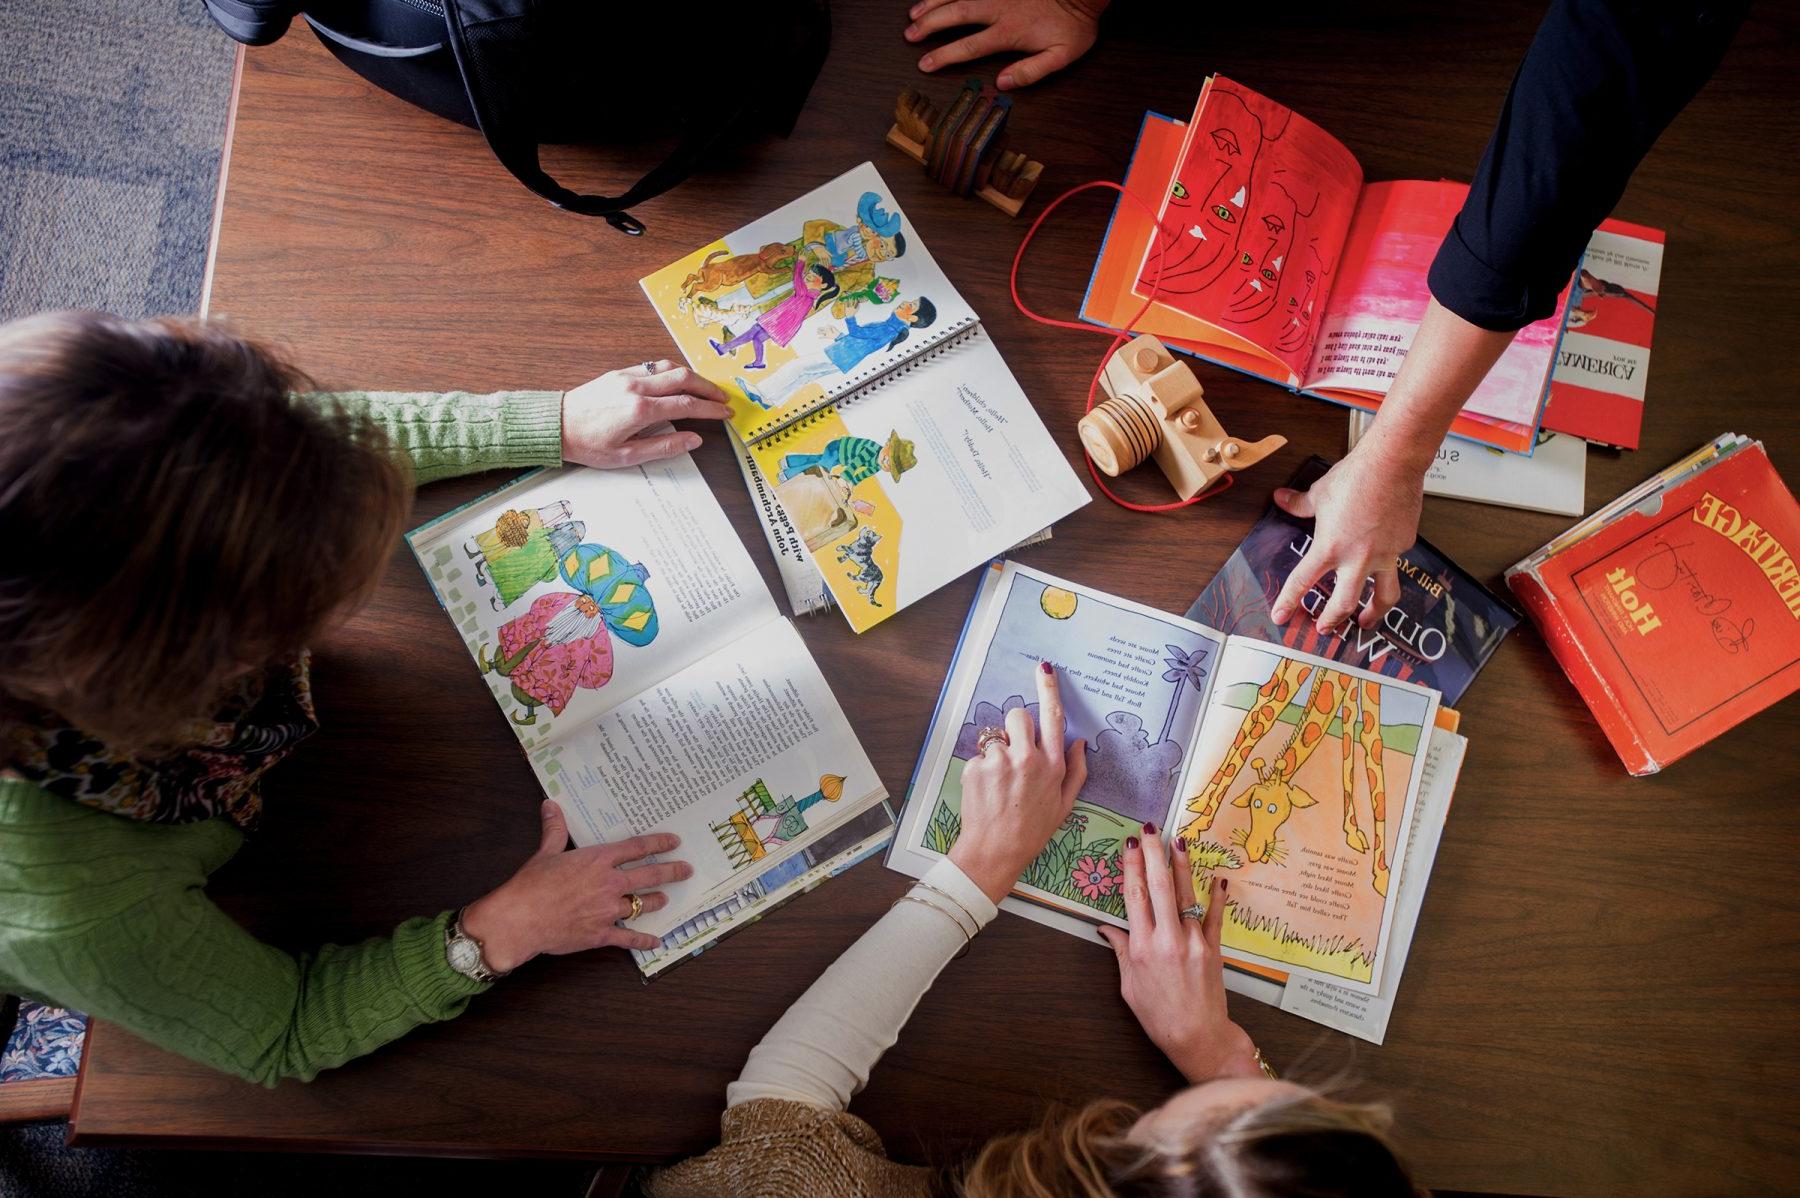 On top view of three people looking over children's book places on a desk.